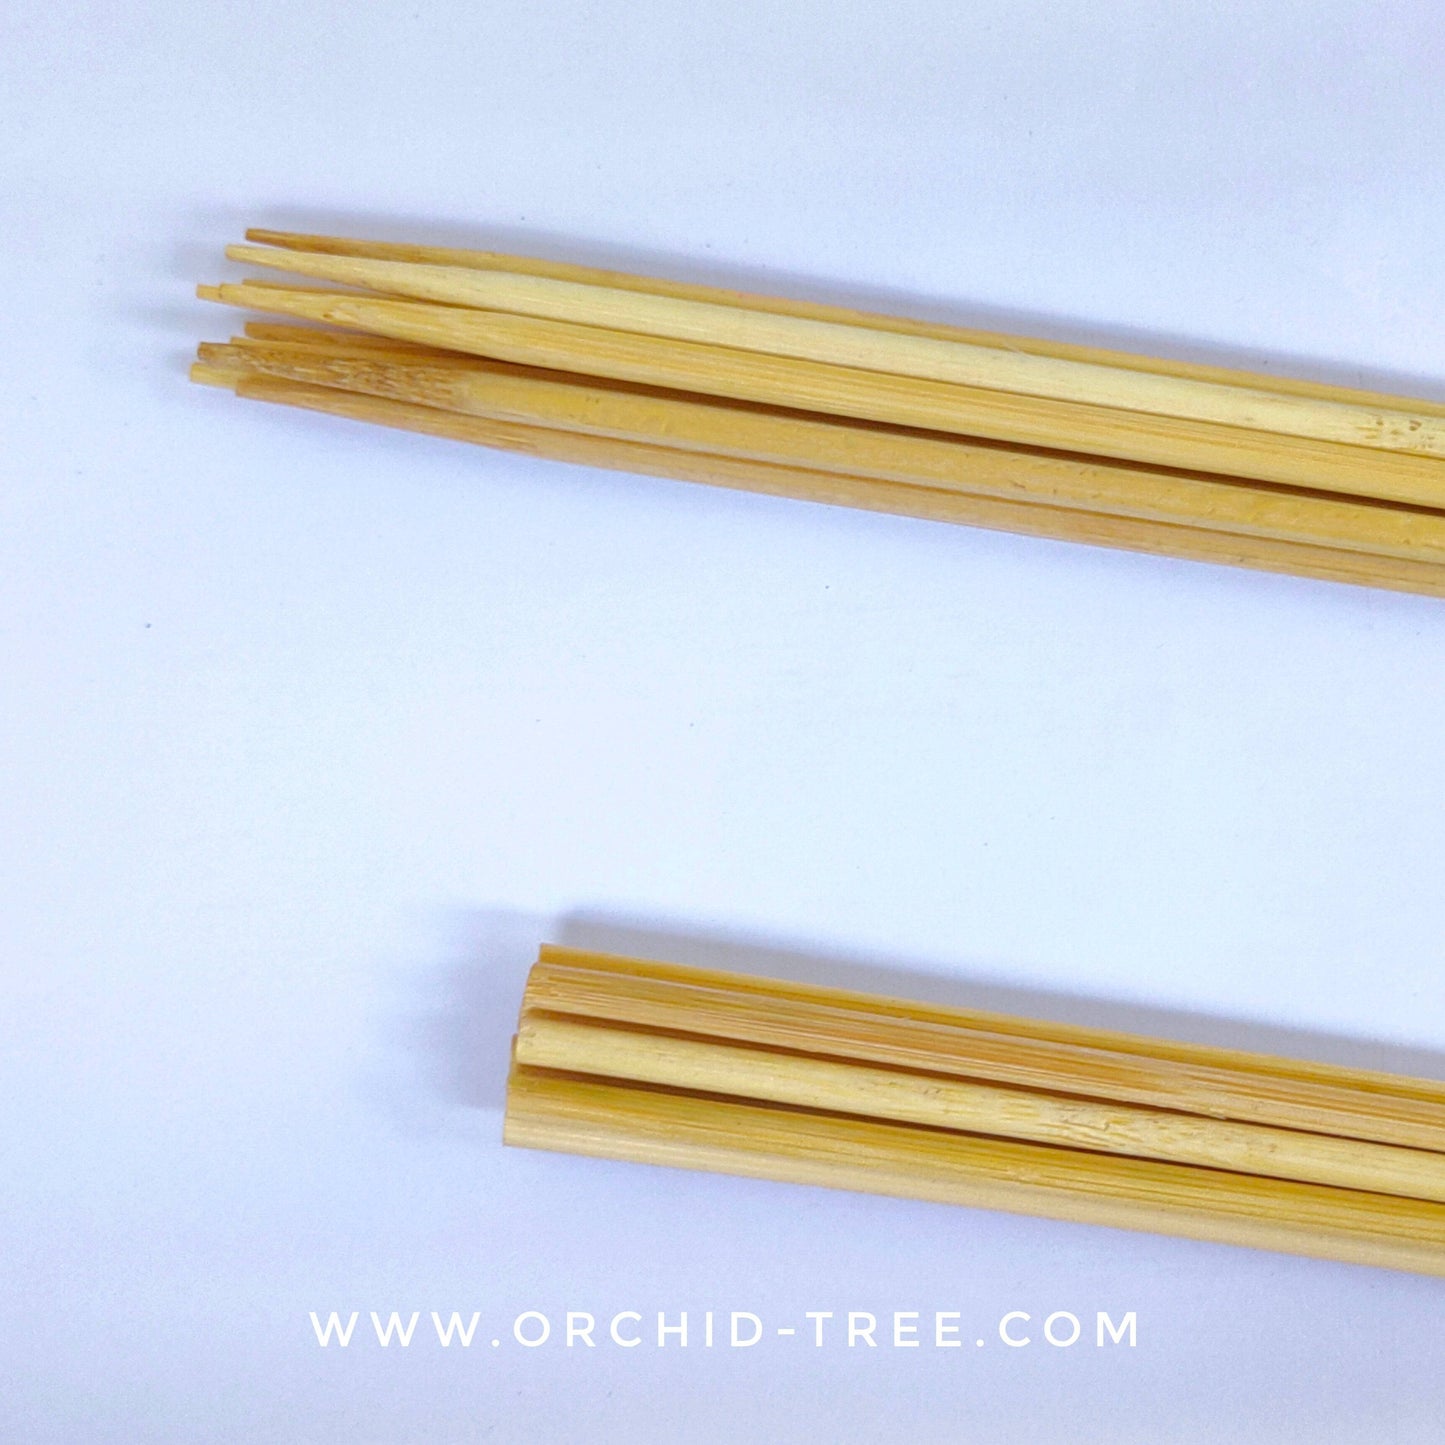 Orchid Bamboo Stakes | Pack of 10 Pcs - Buy Orchids Plants Online by Orchid-Tree.com